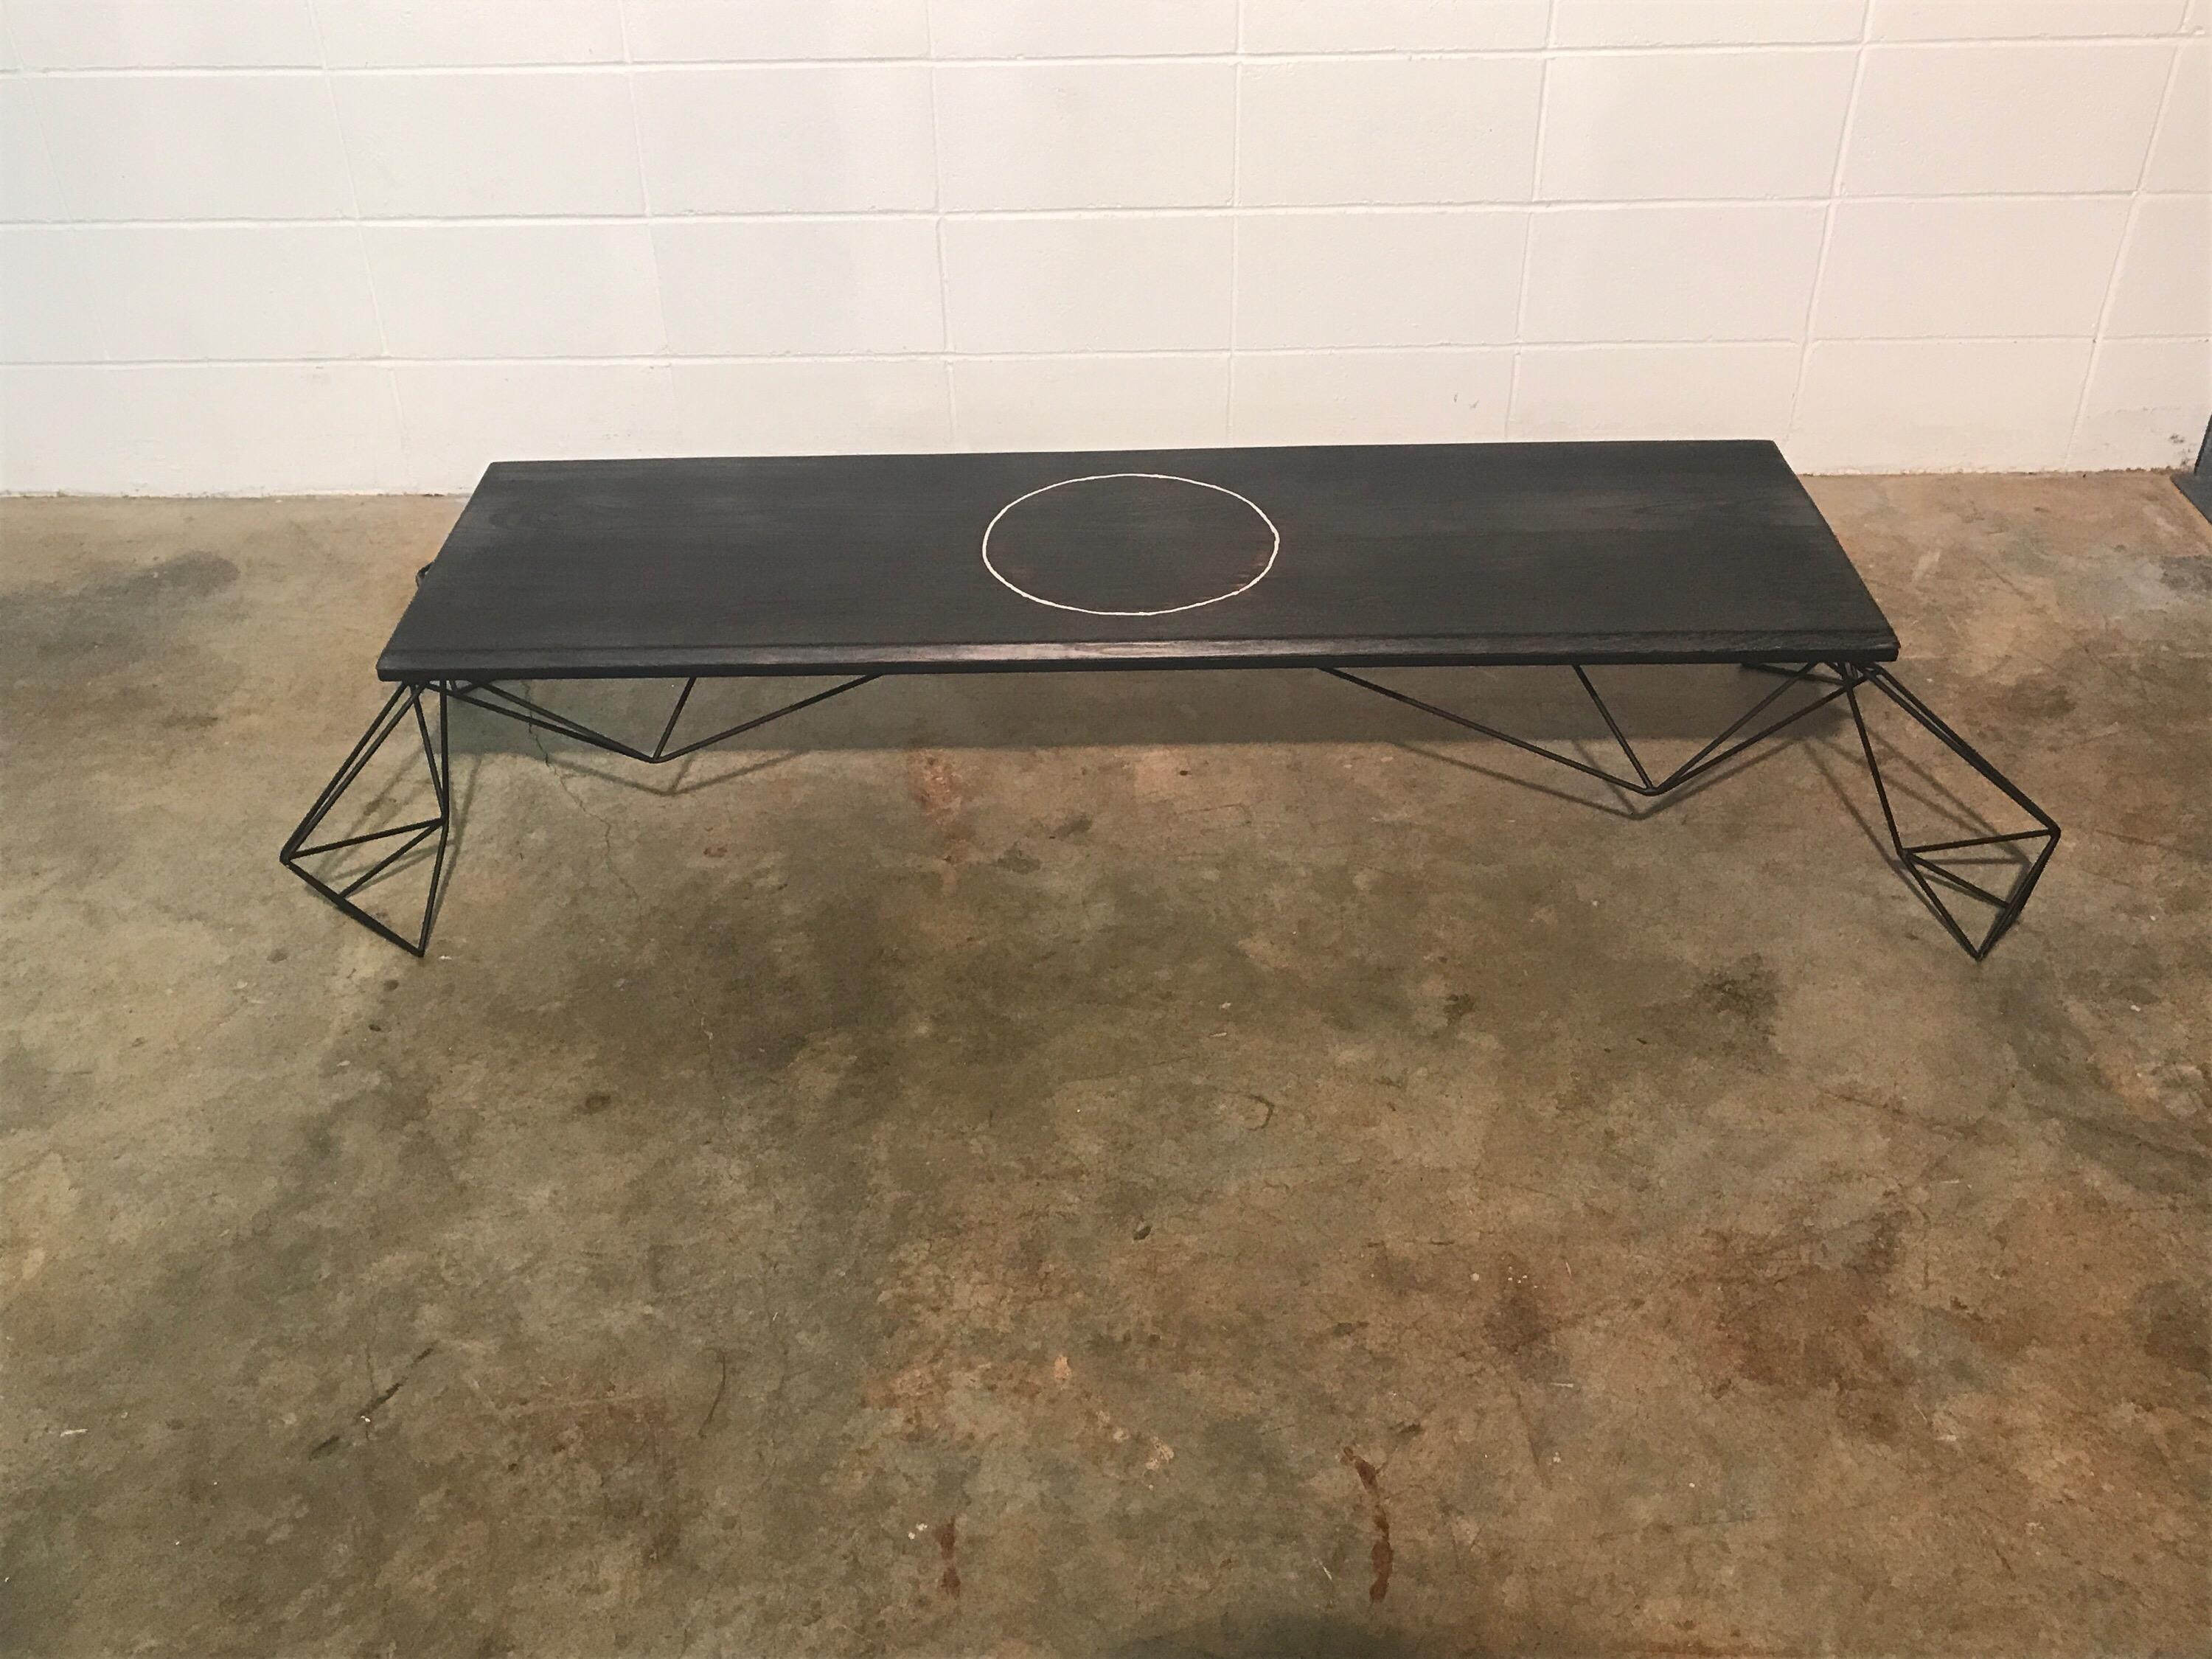 Sculptural modern geometric custom designed and fabricated coffee table. This stunning table has the perfect blend of sleek modernism and beautifully grained ebonized hardwood plus a metal inlay. It was designed and fabricated by Joshua Shorey.